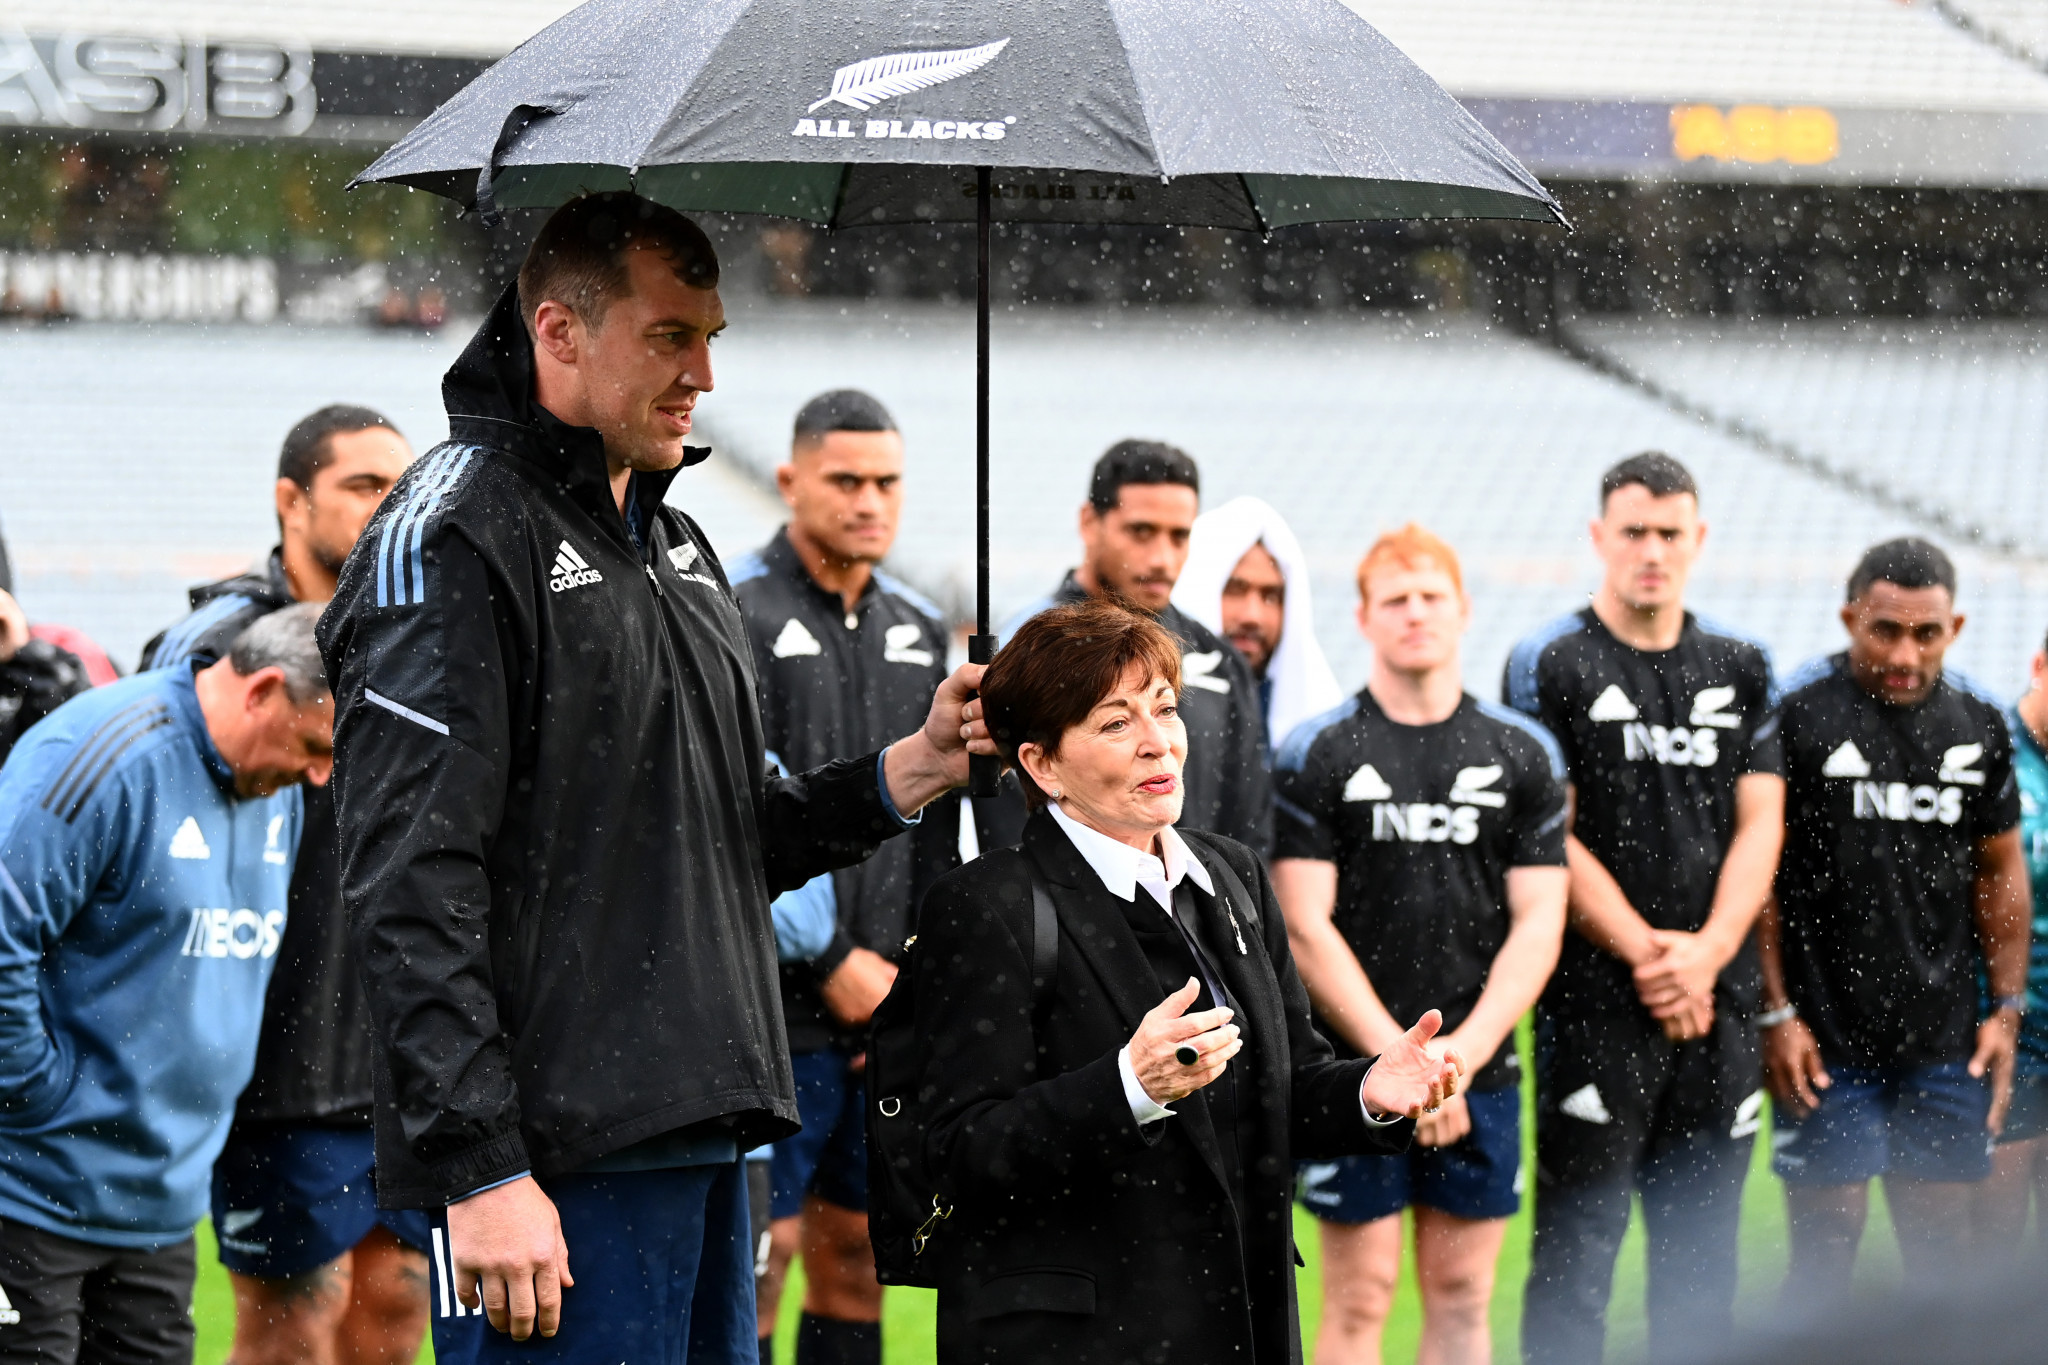 New Zealand Rugby appoints first female chair as Mitchell steps down after fewer than two years in role